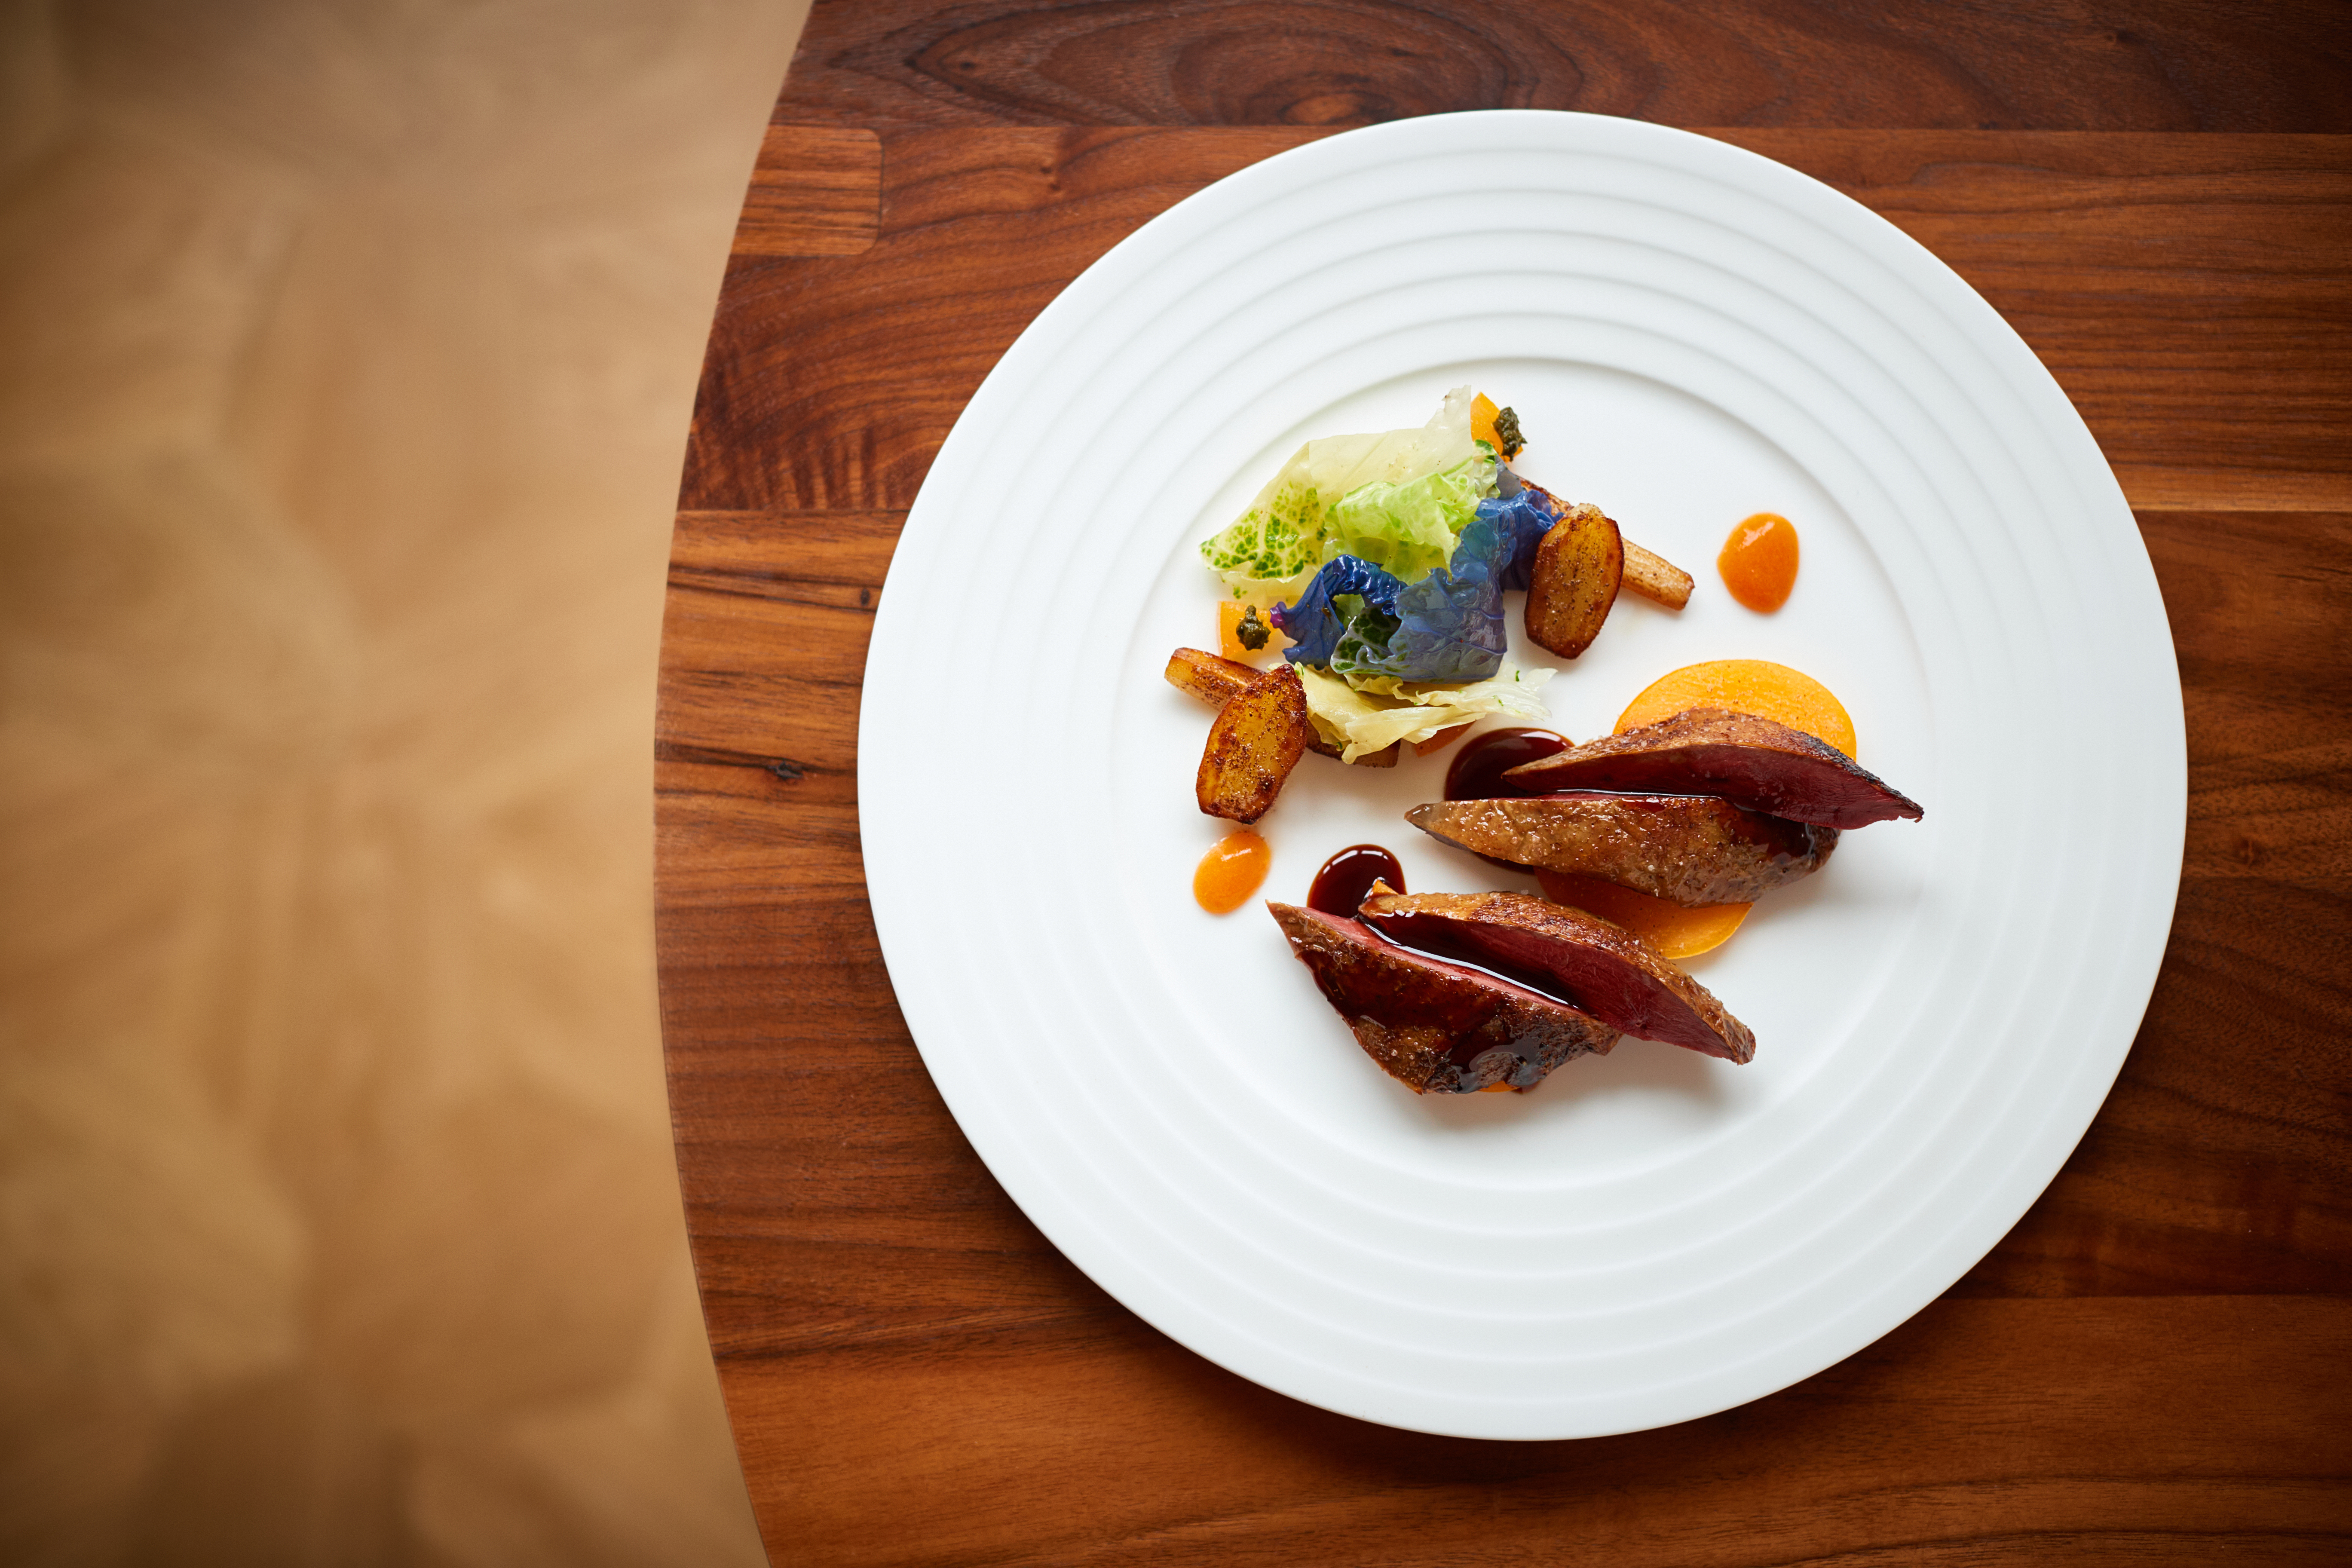 Roast pigeon, persimmon, and chervil root at Trivet, one of the best new restaurants in London